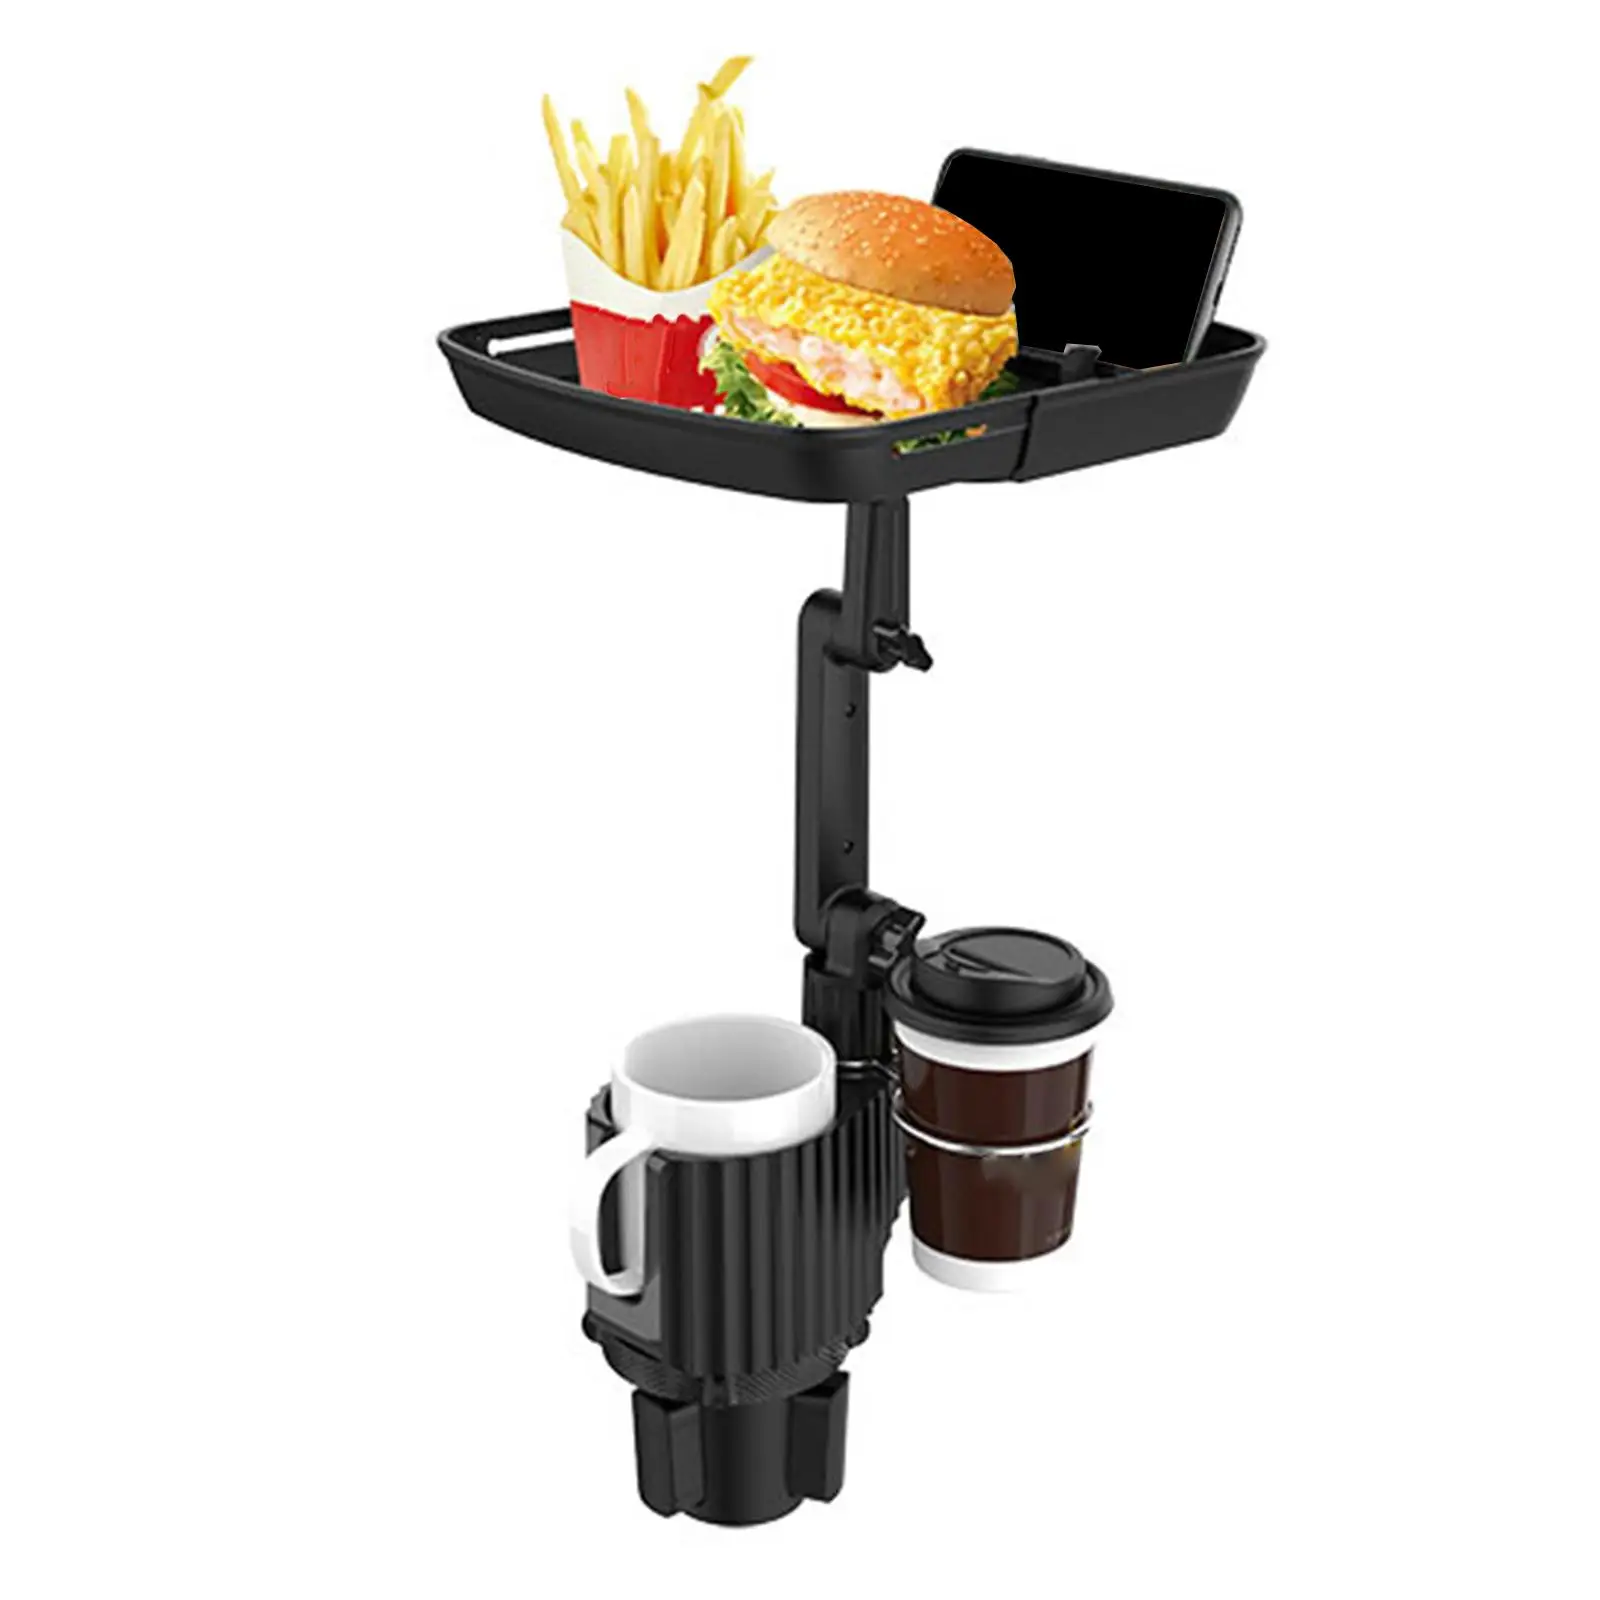 Car Cup Holder Tray Dining Table 360 Swivel Arm Black Sturdy Dinner Plate Multifunctional Practical for Most Car Dining Durable